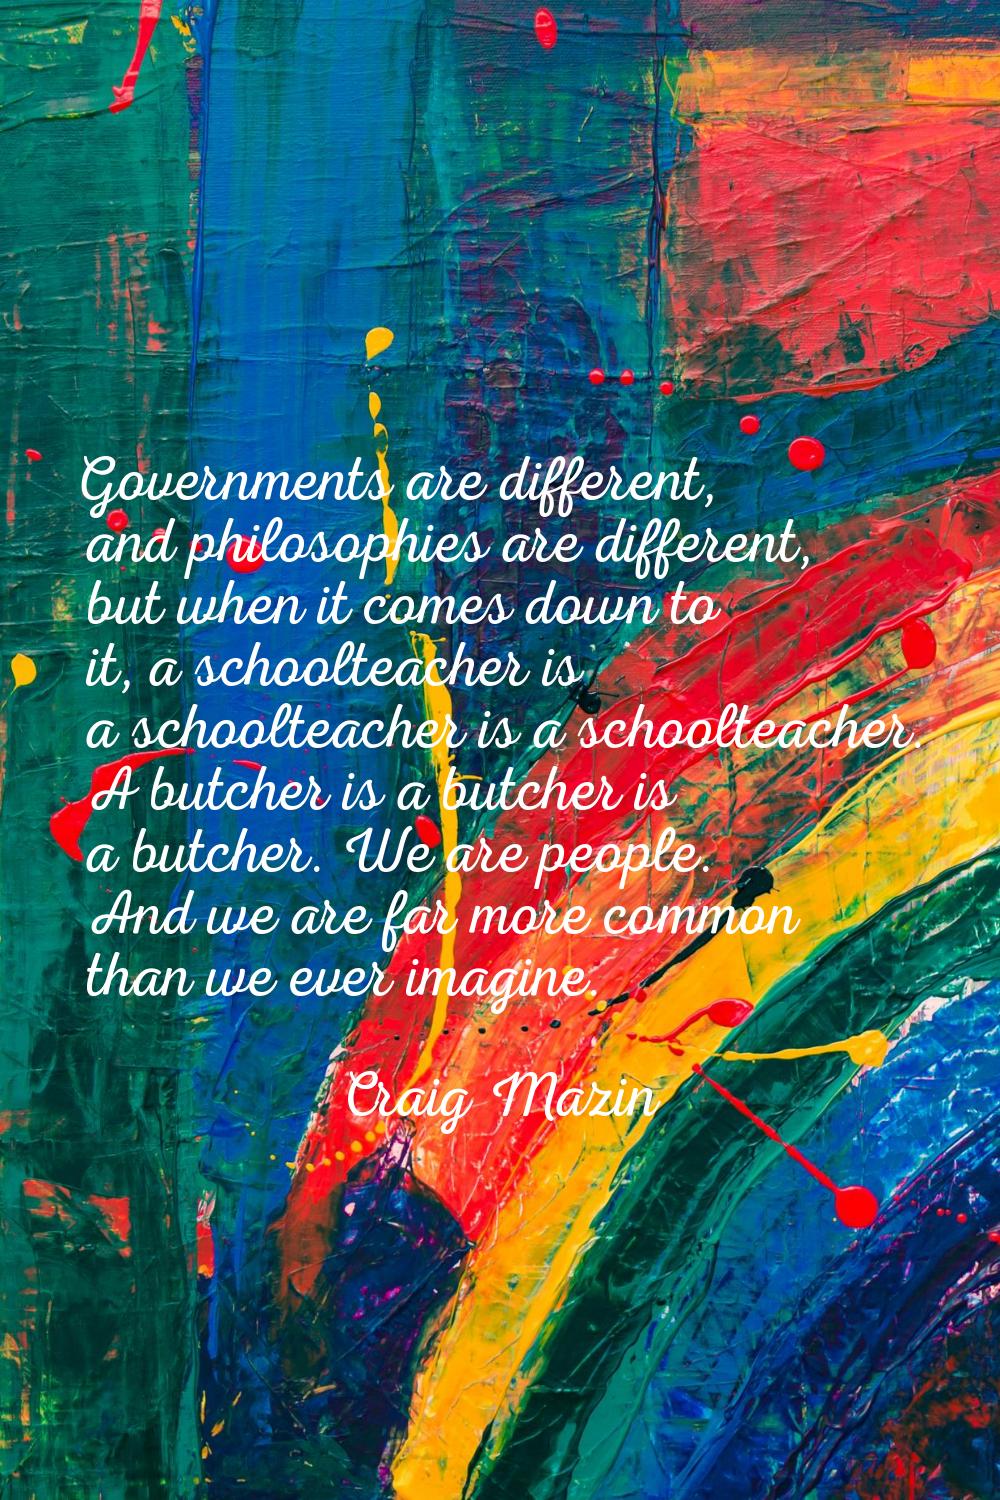 Governments are different, and philosophies are different, but when it comes down to it, a schoolte